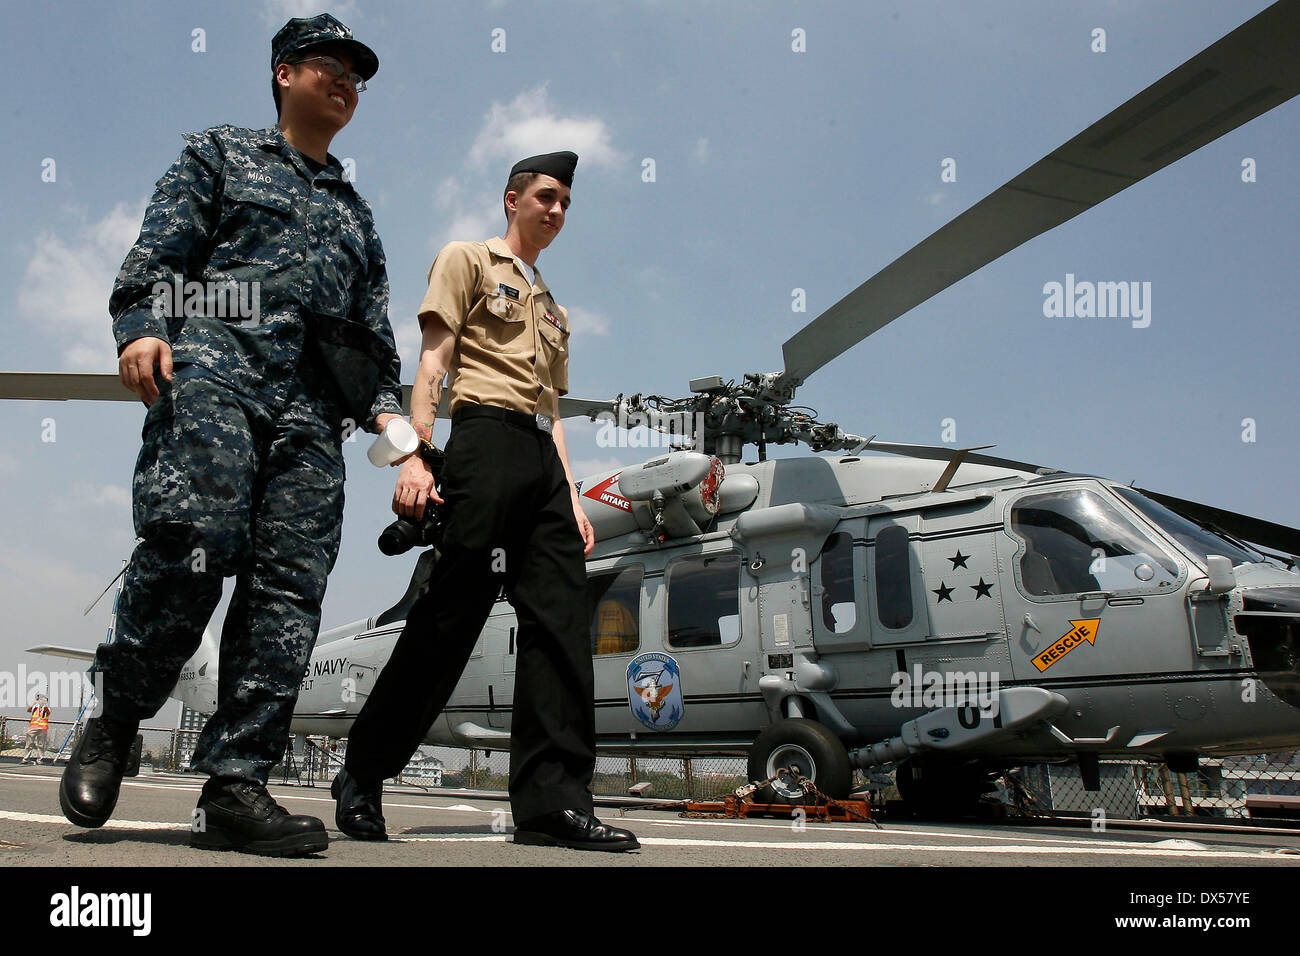 Manila, Philippines. 18th Mar, 2014. Soldiers from the U.S. Navy walk in front of an SH-60 helicopter on board of the USS Blue Ridge (LCC-19), the command flagship of United States Seventh Fleet in Manila, the Philippines, March 18, 2014. USS Blue Ridge arrived Tuesday at South Harbor in Manila for a goodwill visit, which will last until March 22. Credit:  Rouelle Umali/Xinhua/Alamy Live News Stock Photo